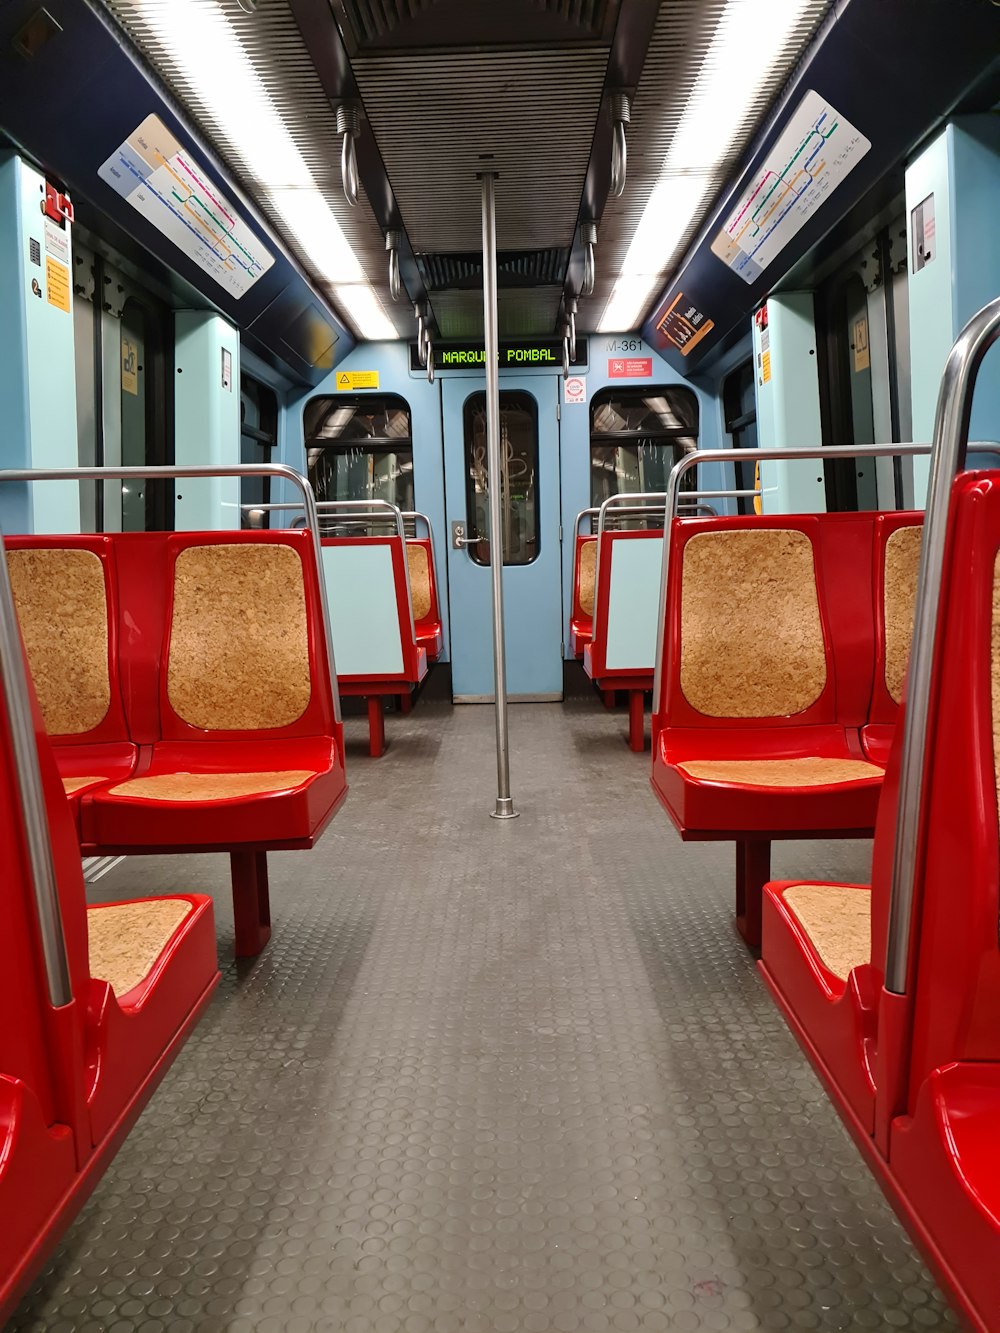 a subway car with red seats and metal railings